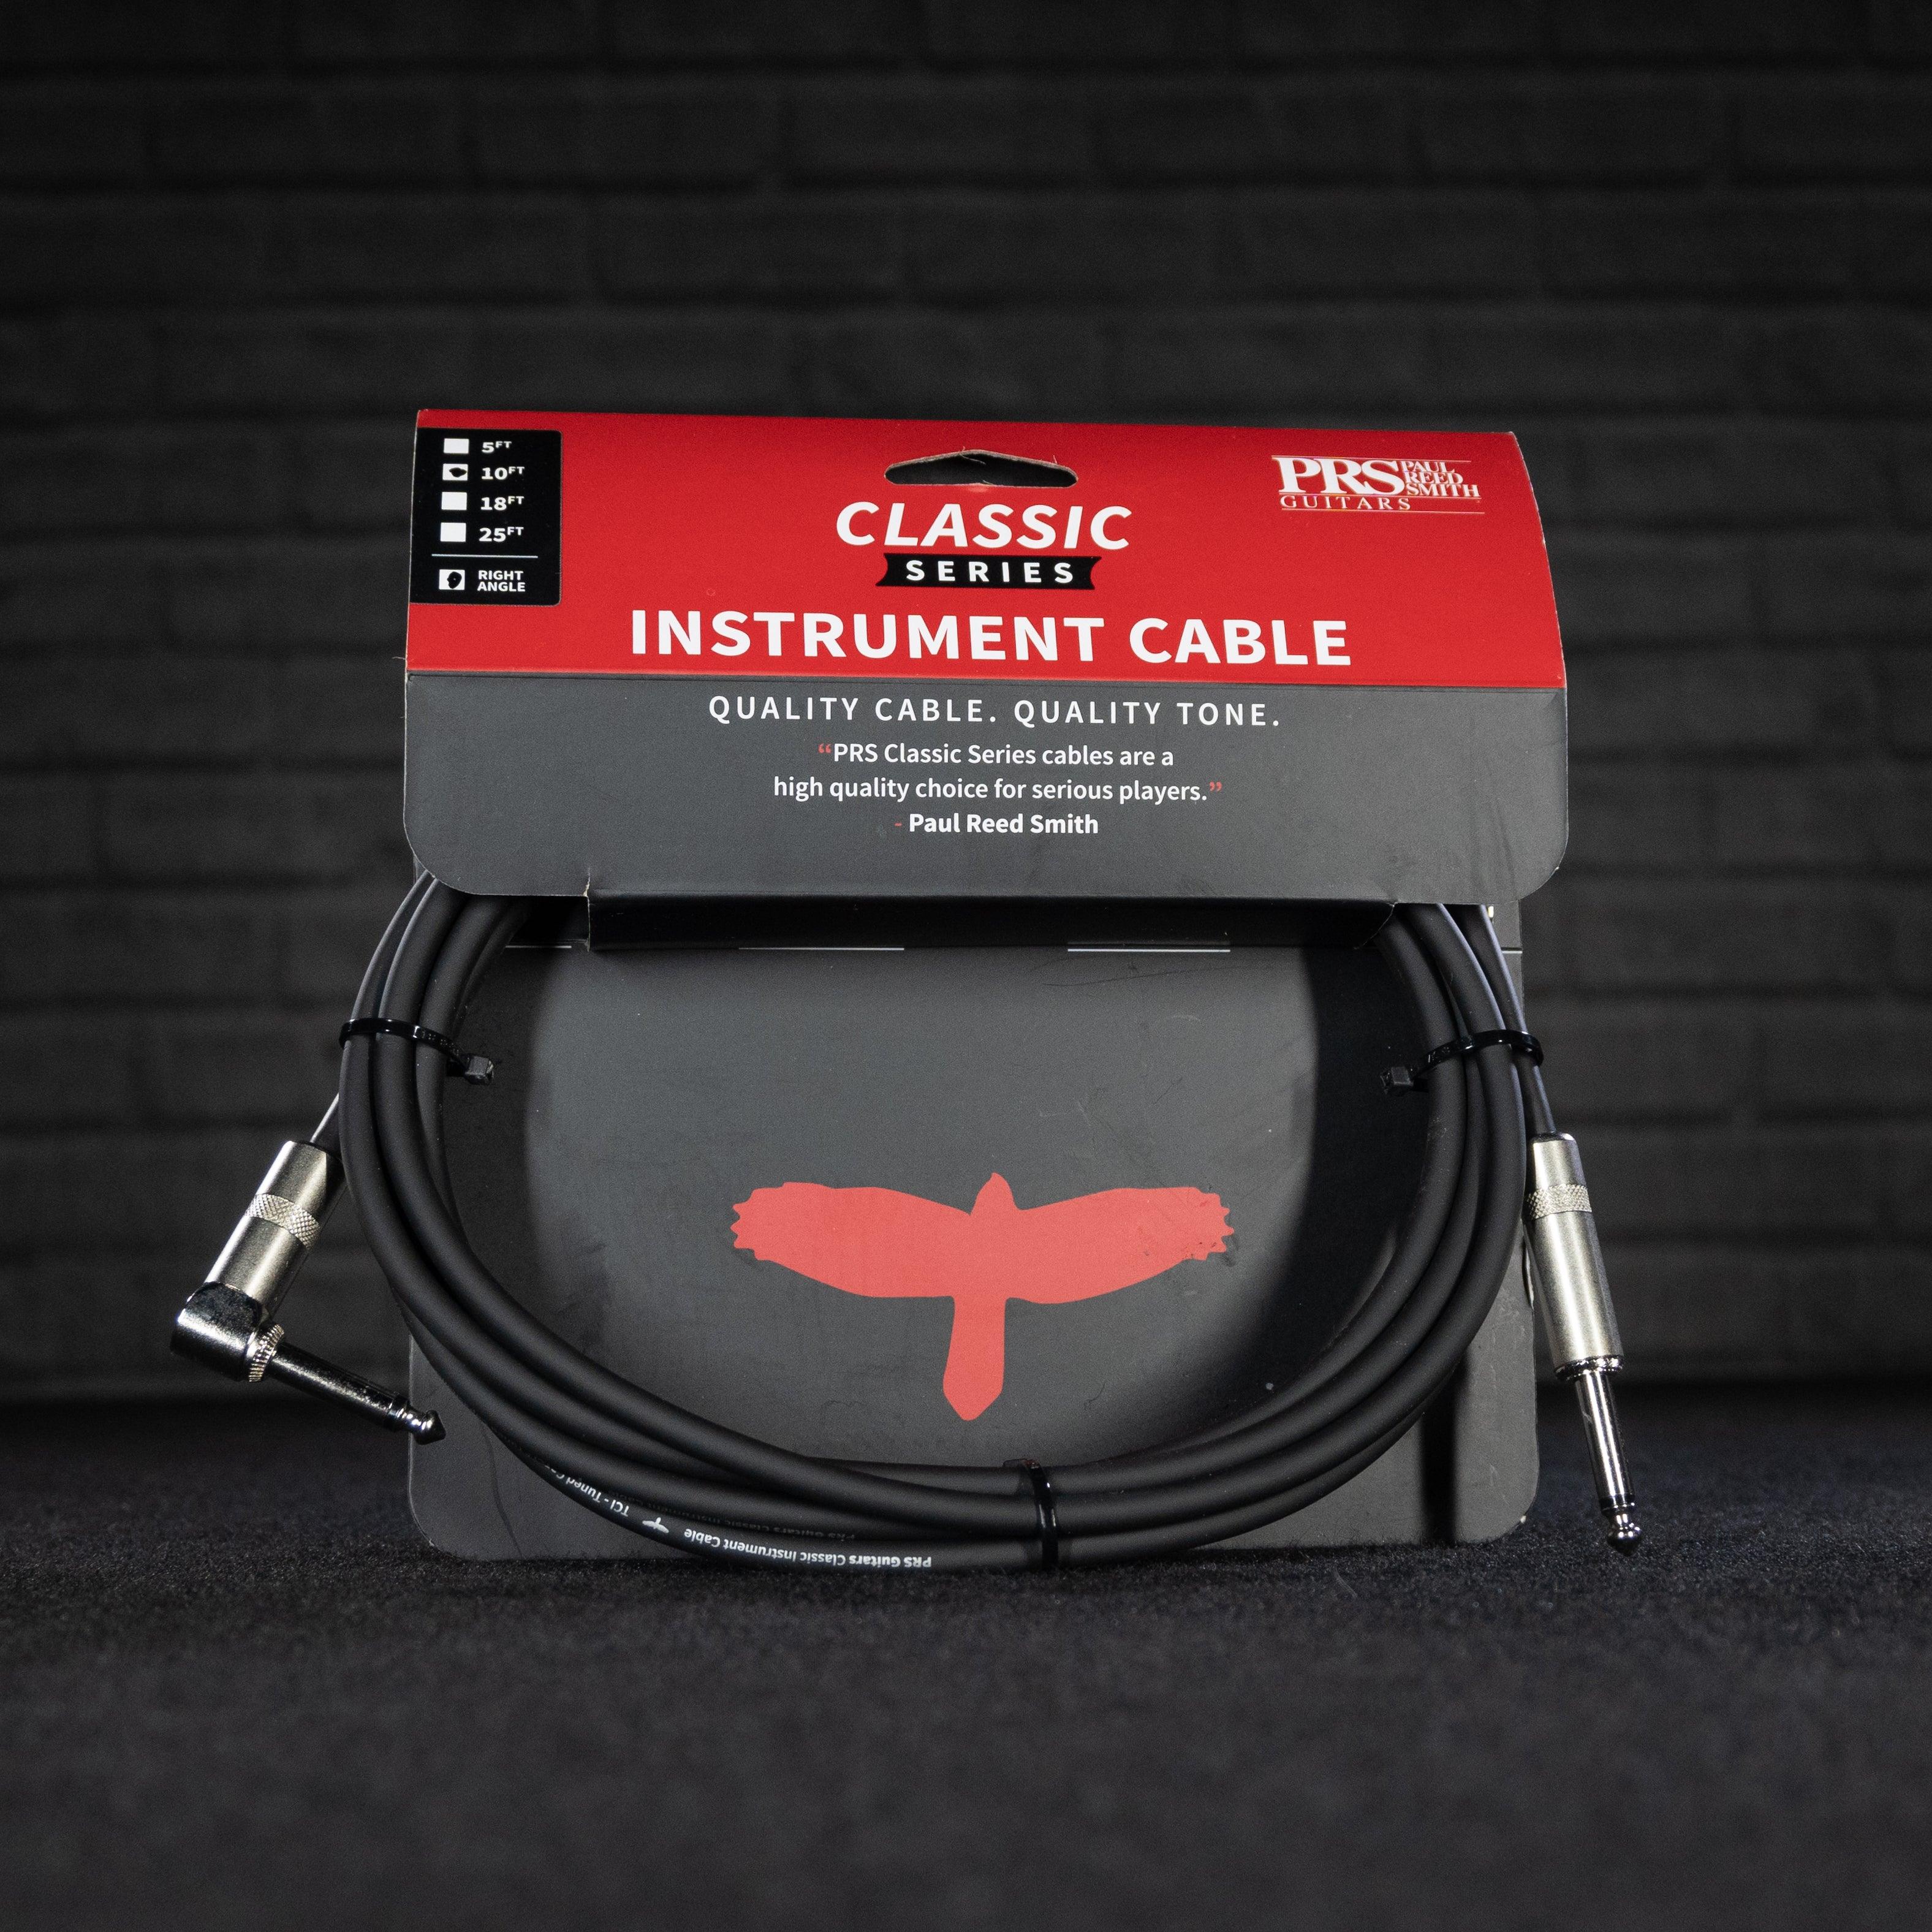 PRS Classic Series 10ft. Cable Angle/Straight - Impulse Music Co.